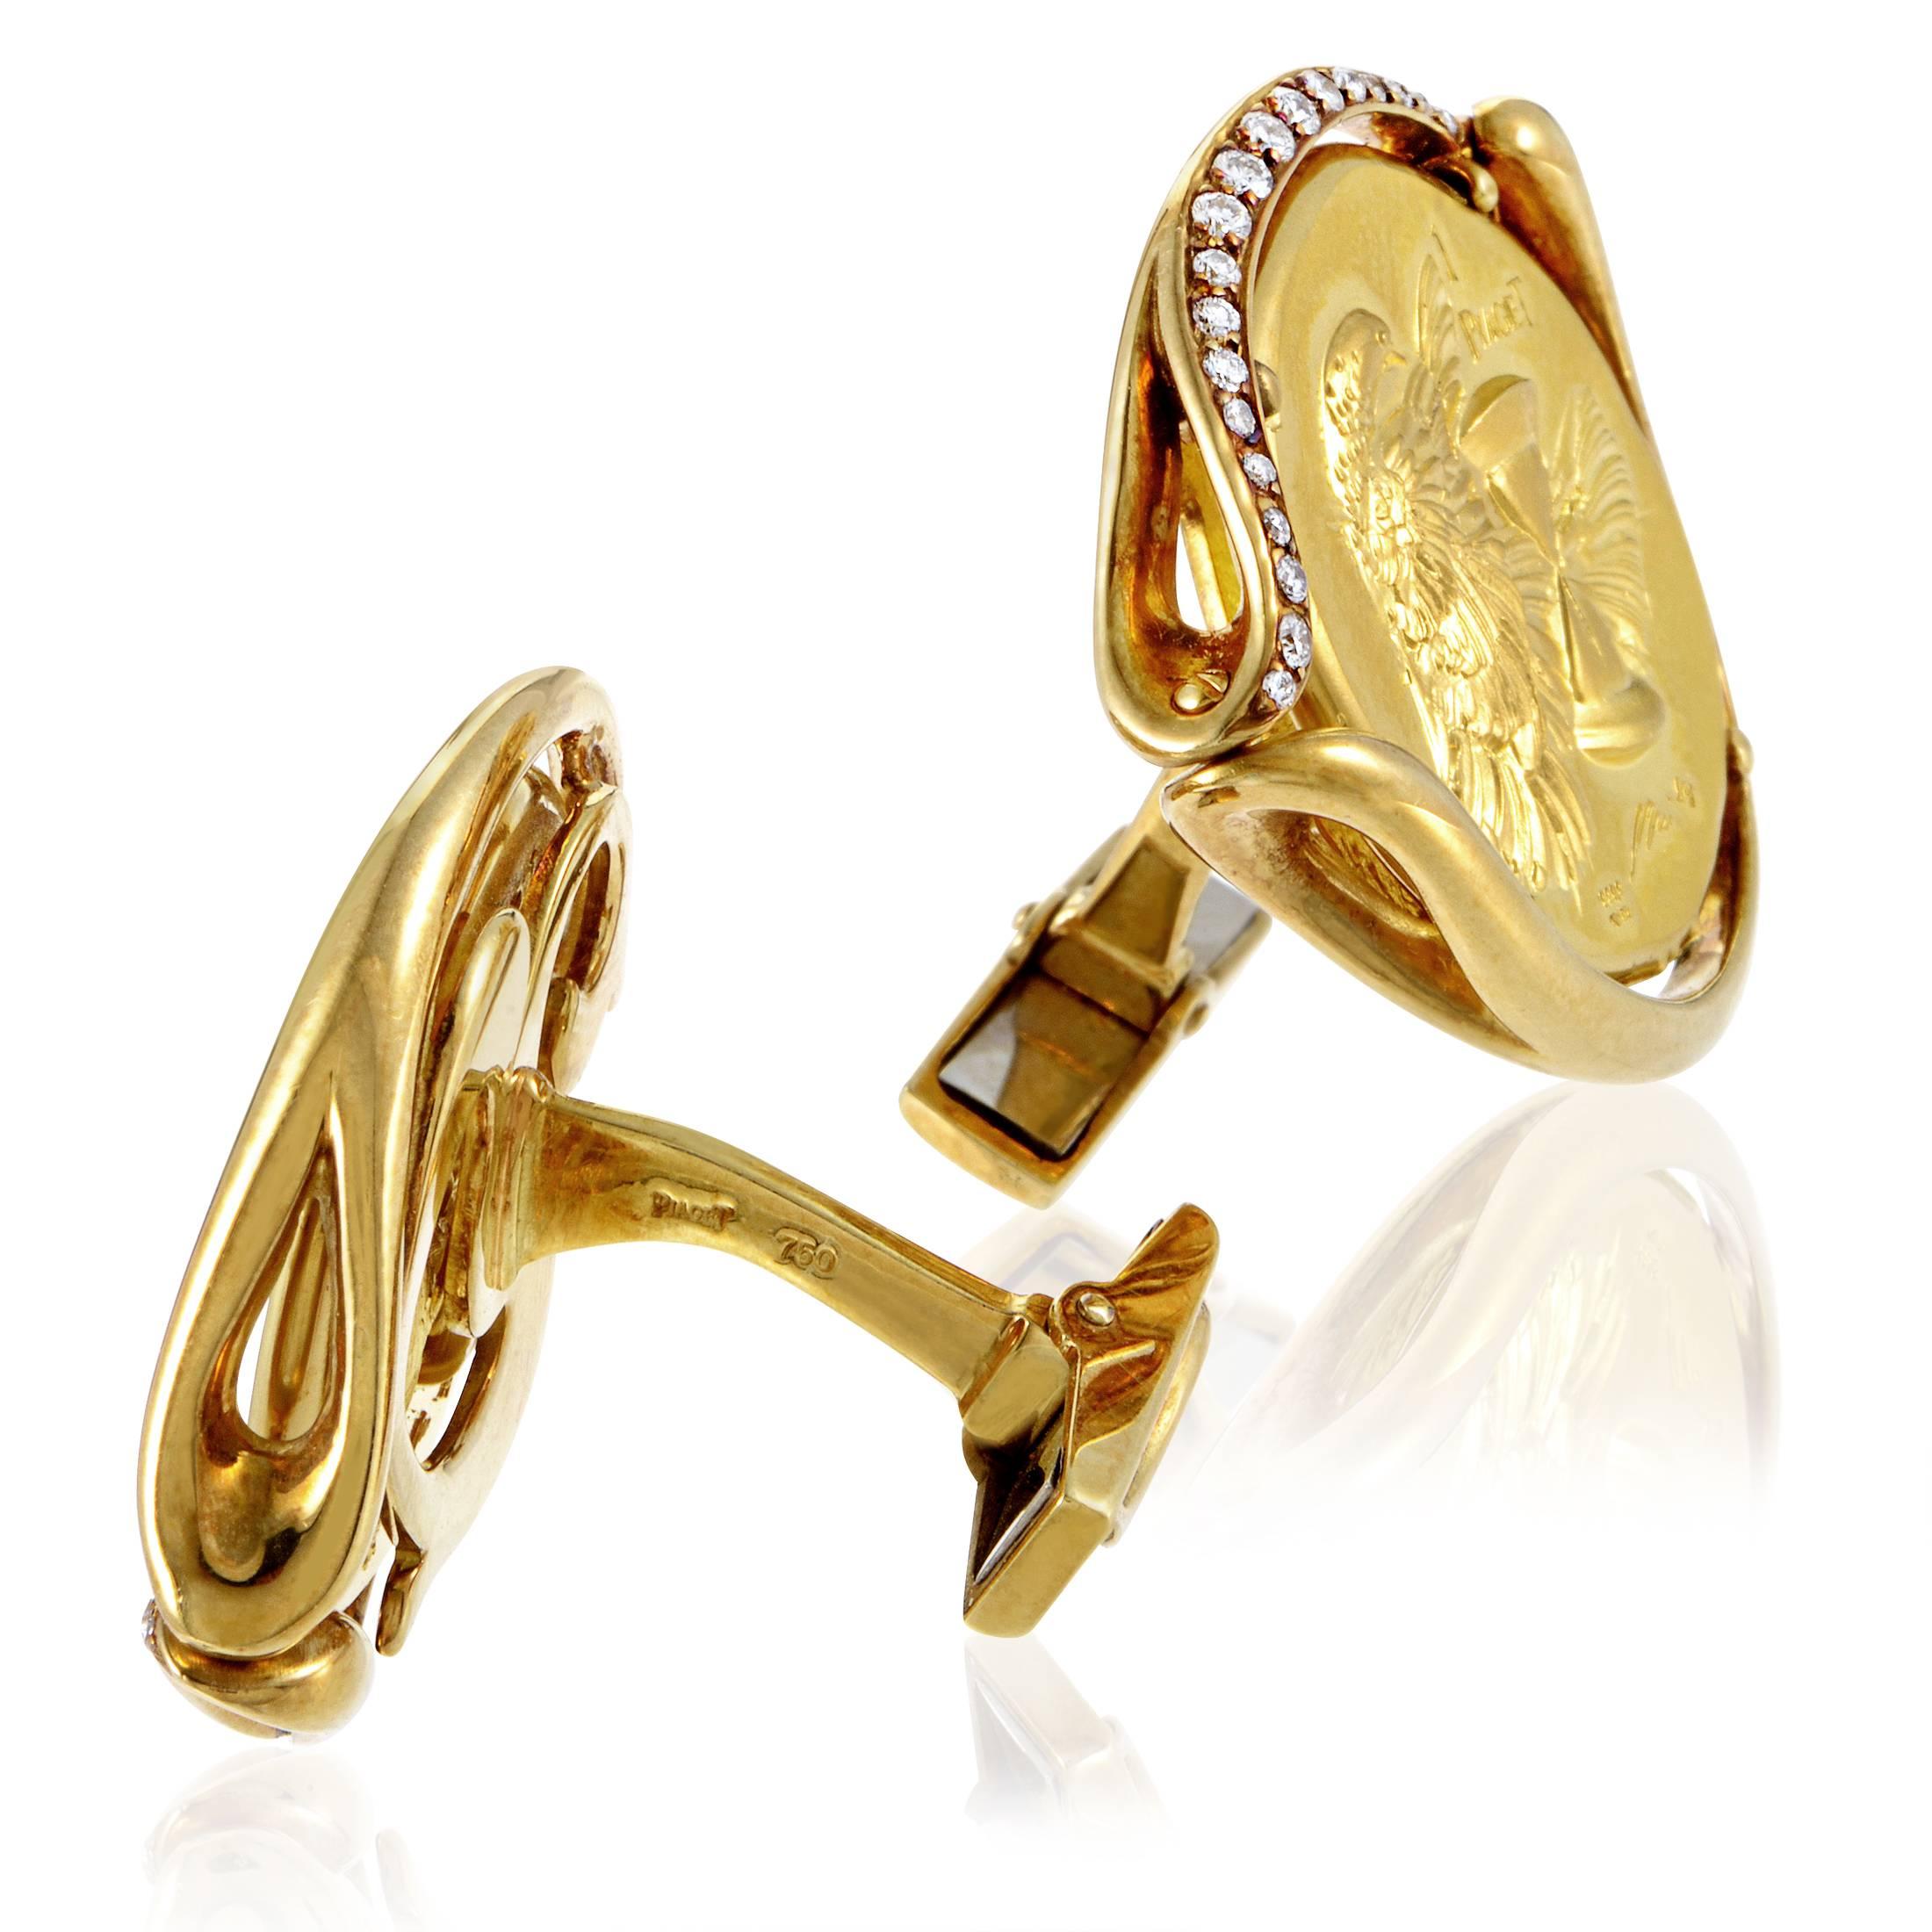 A magnificent prestigious blend of gleaming 18K yellow gold and fascinating 22K yellow gold is coupled with resplendent diamonds totaling 0.40ct in these exceptional cufflinks from Piaget that also boast intriguing artistic reliefs.